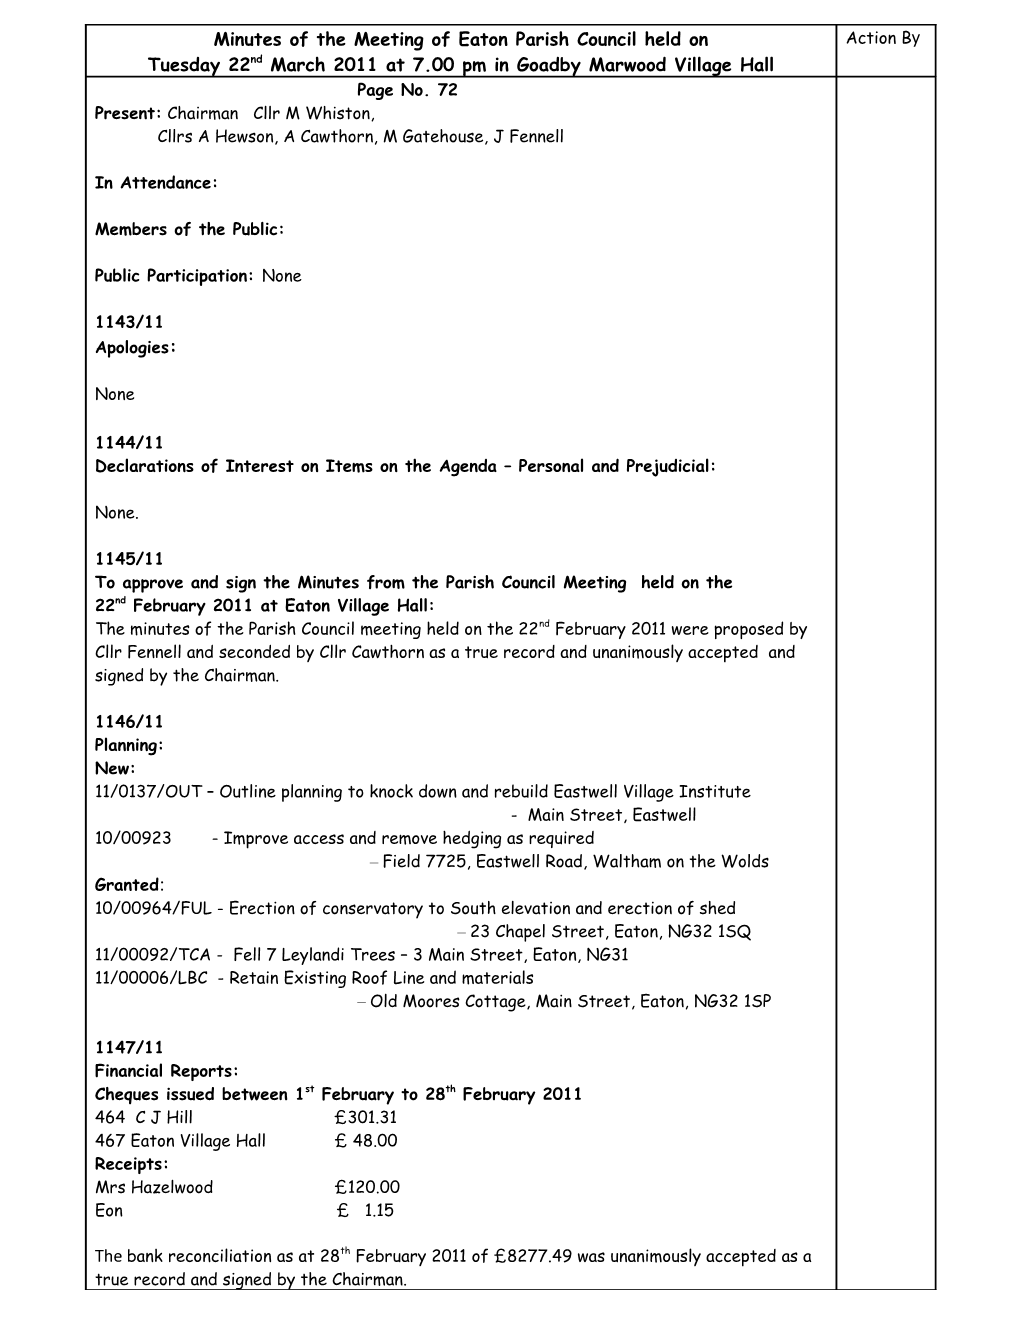 Minutes of the Meeting of Seagrave Parish Council On